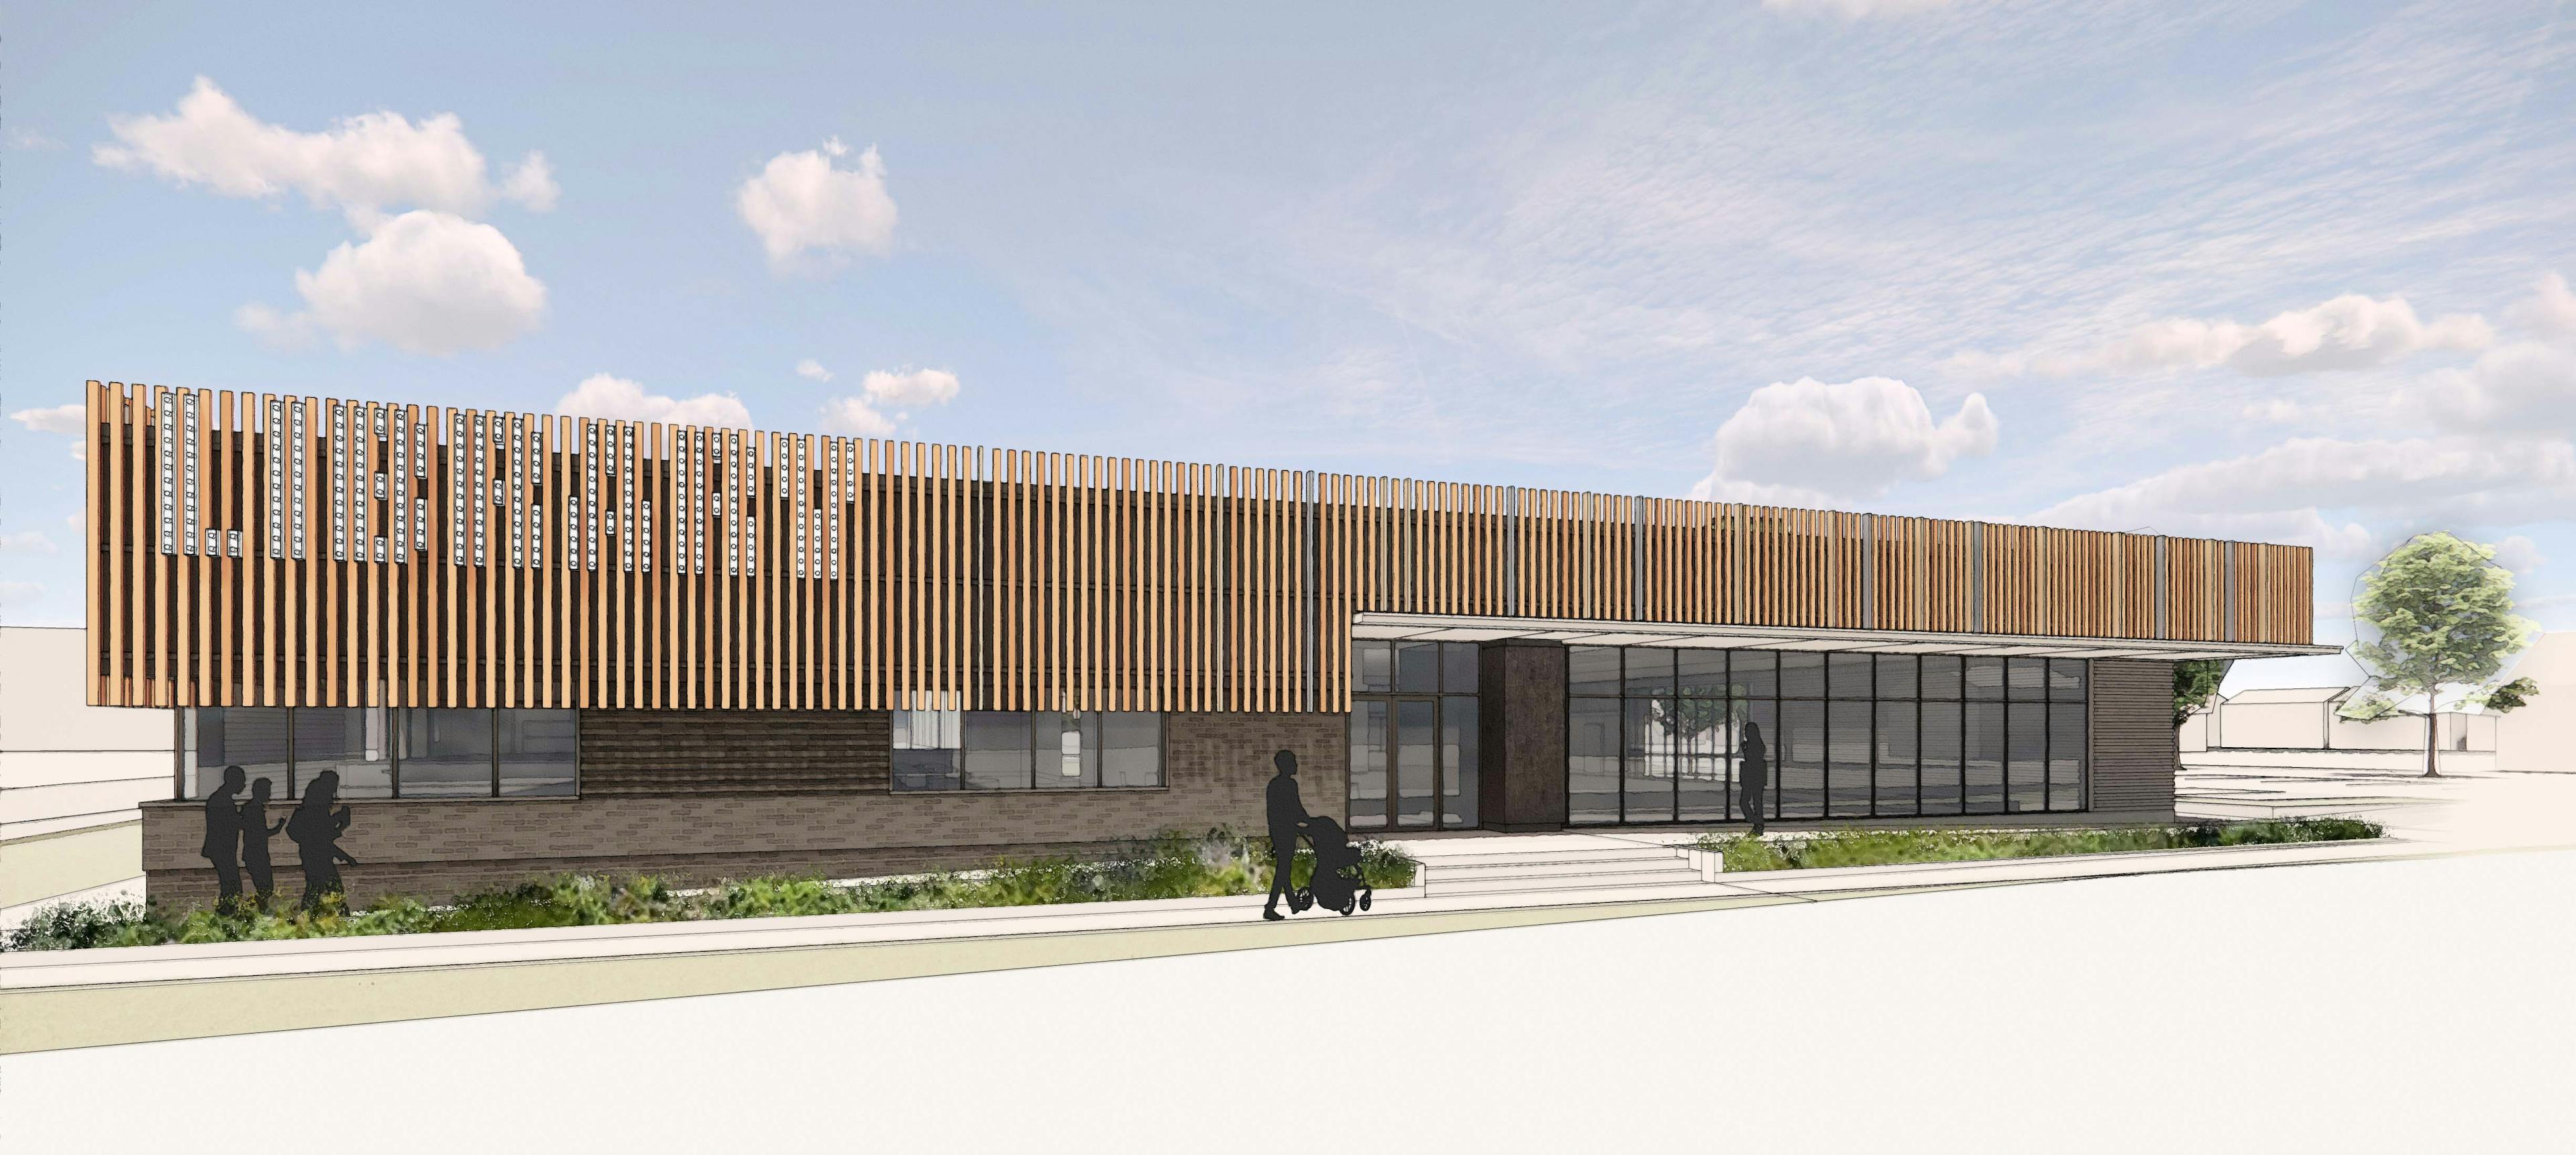 rendering of new rockport branch of the cleveland public library